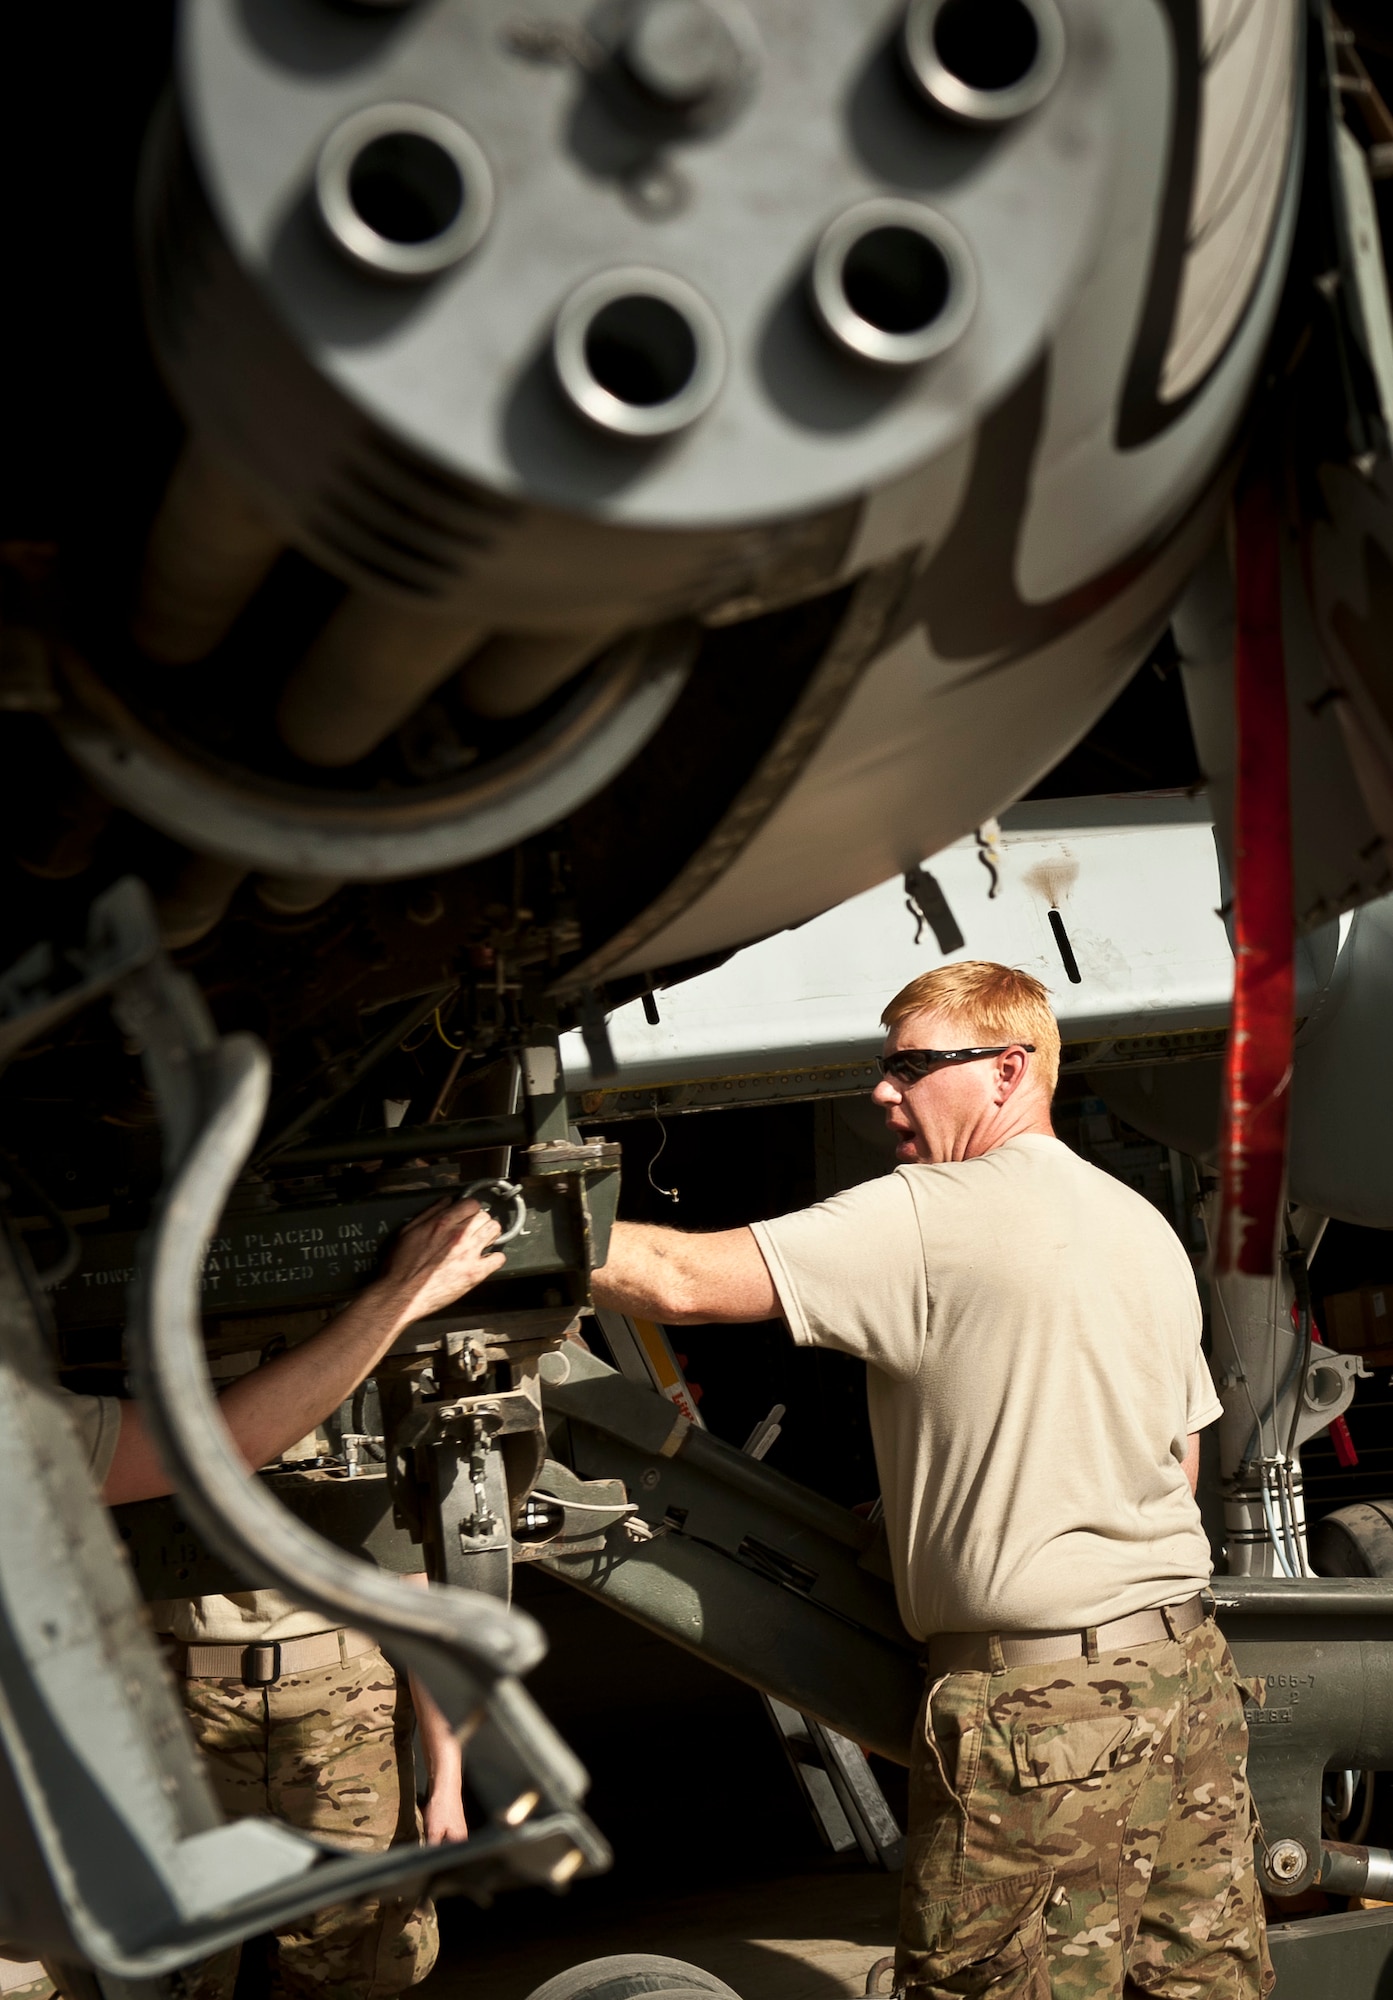 MSgt Daniel Boyd, an armament systems mechanic with the 455th Expeditionary Maintenance Squadron, oversees the removal of an ammo drum from a U.S. Air Force A-10 Thunderbolt II during phase maintenance at Bagram Airfield, Afghanistan, August 8, 2012. Phase maintenance is a comprehensive inspection and tune up performed on USAF aircraft at certain flight hour intervals. (U.S. Air Force Photo/Capt. Raymond Geoffroy)